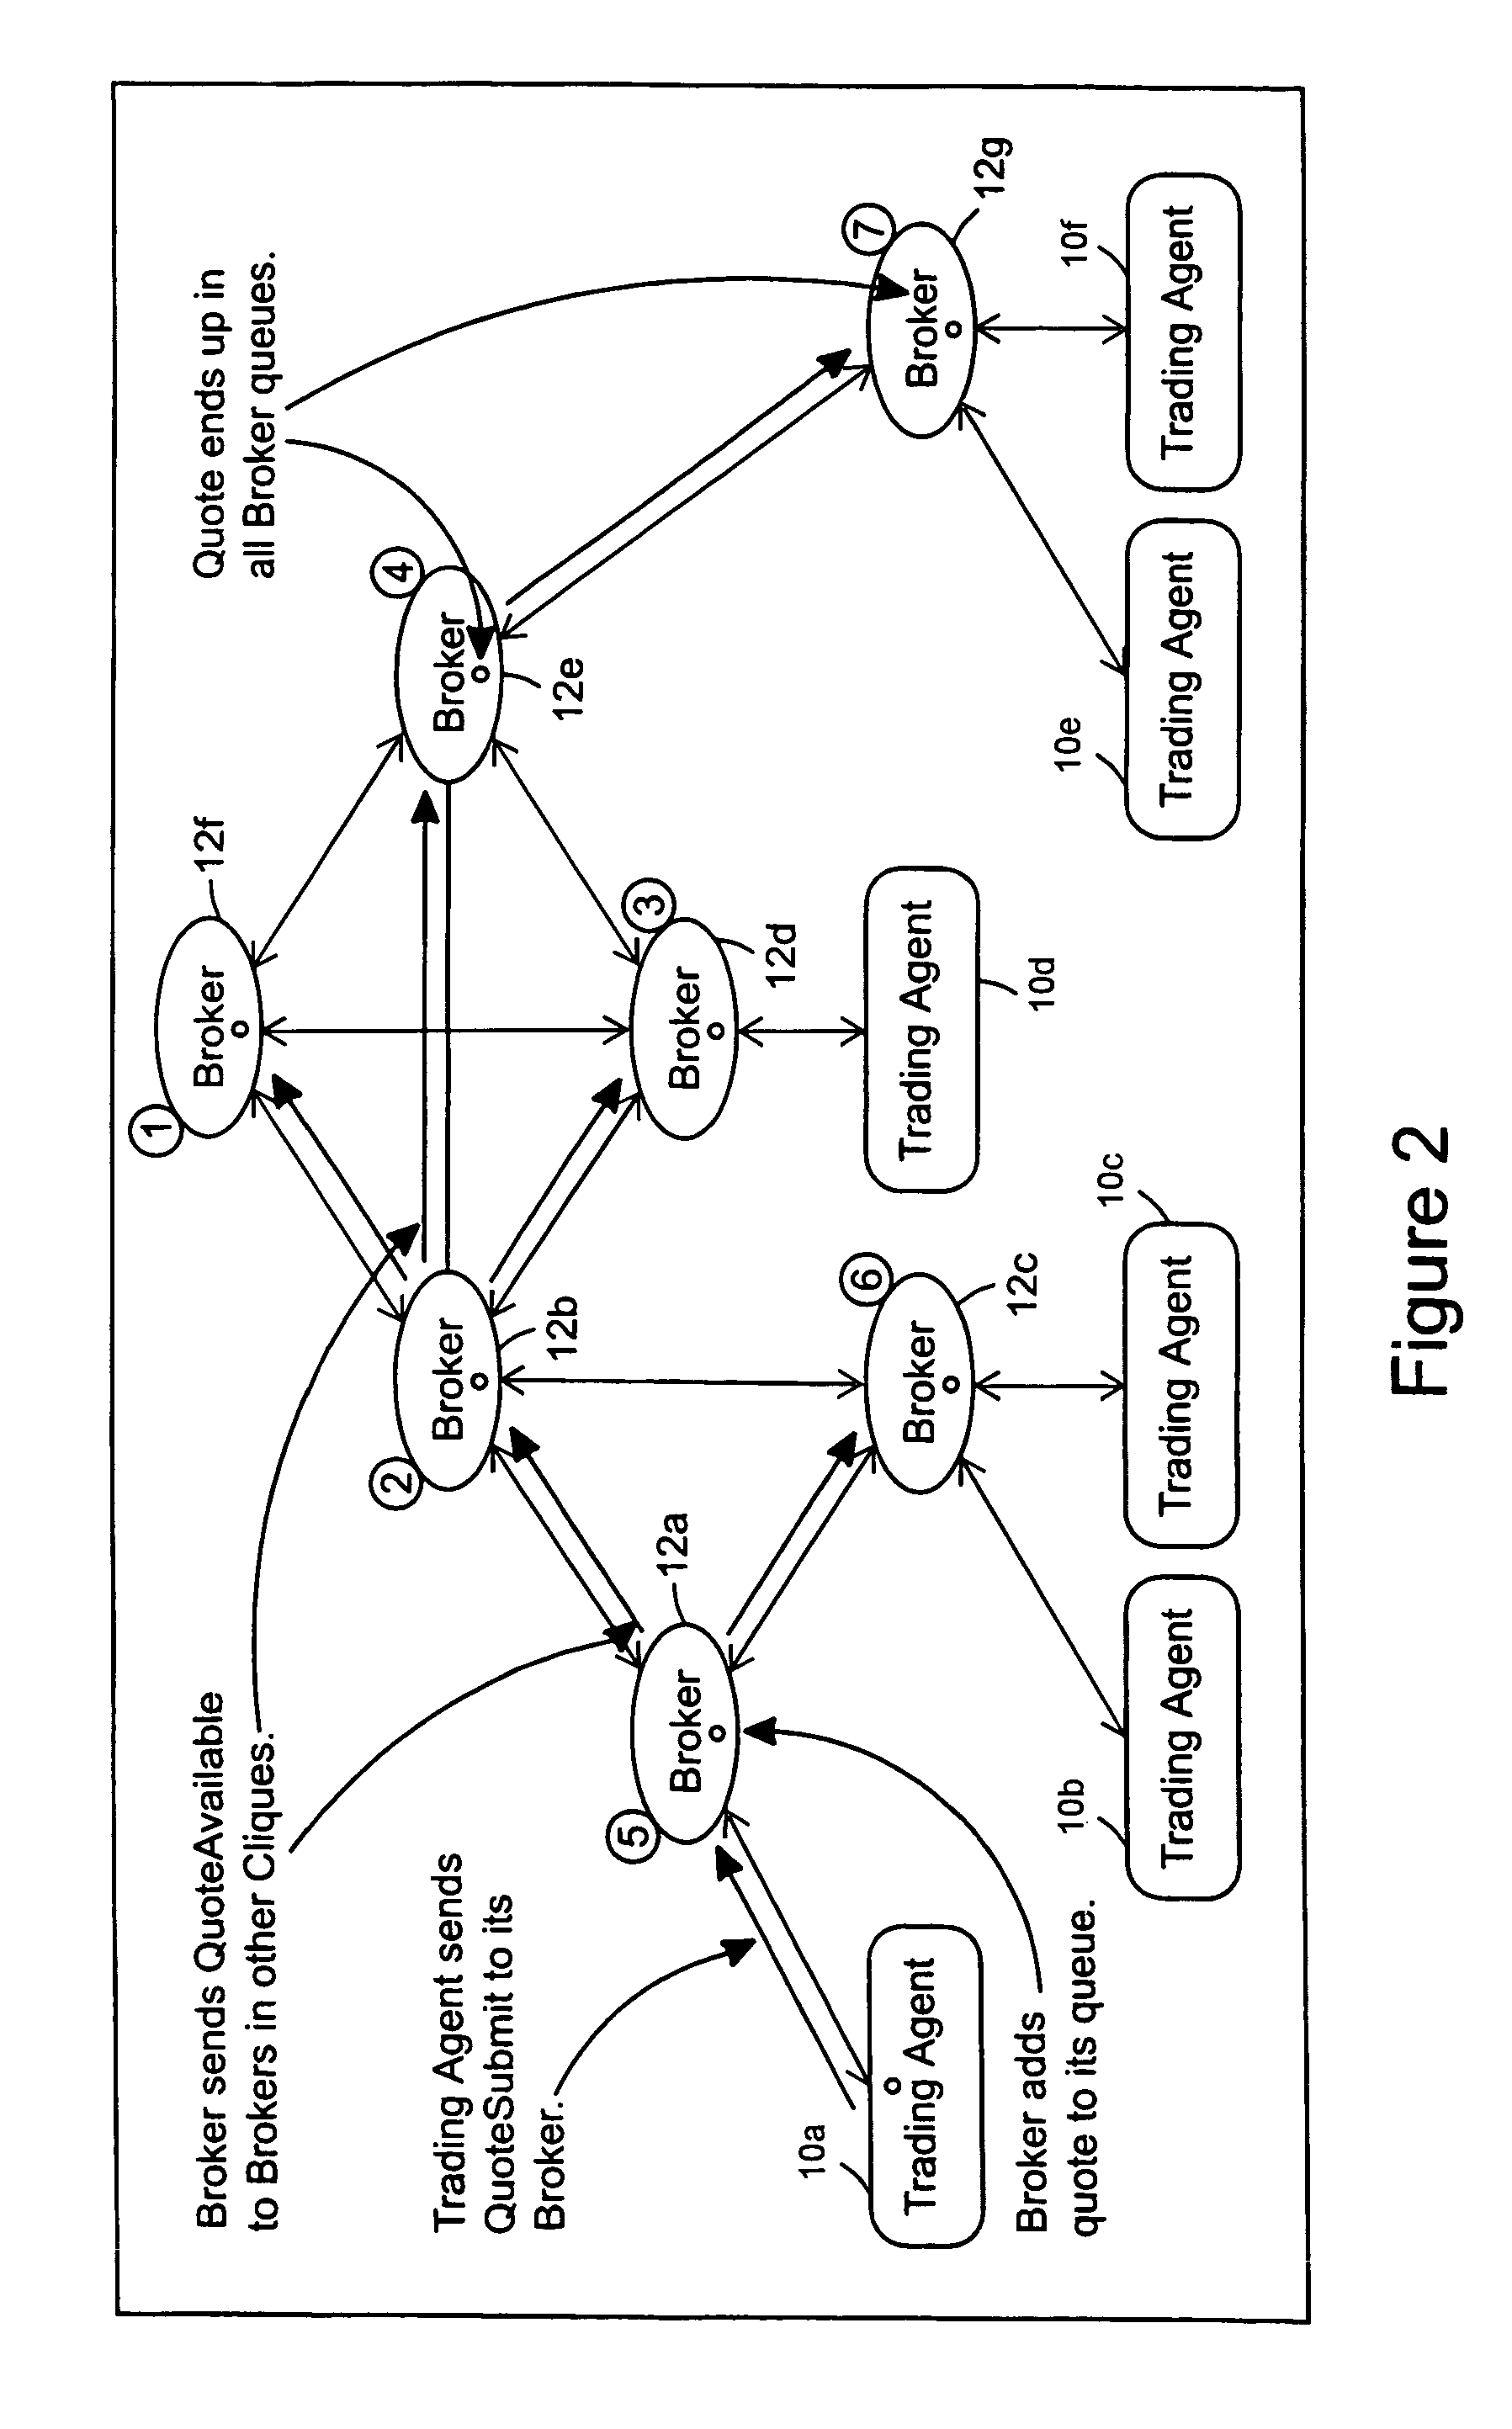 Conversational dealing in an anonymous trading system